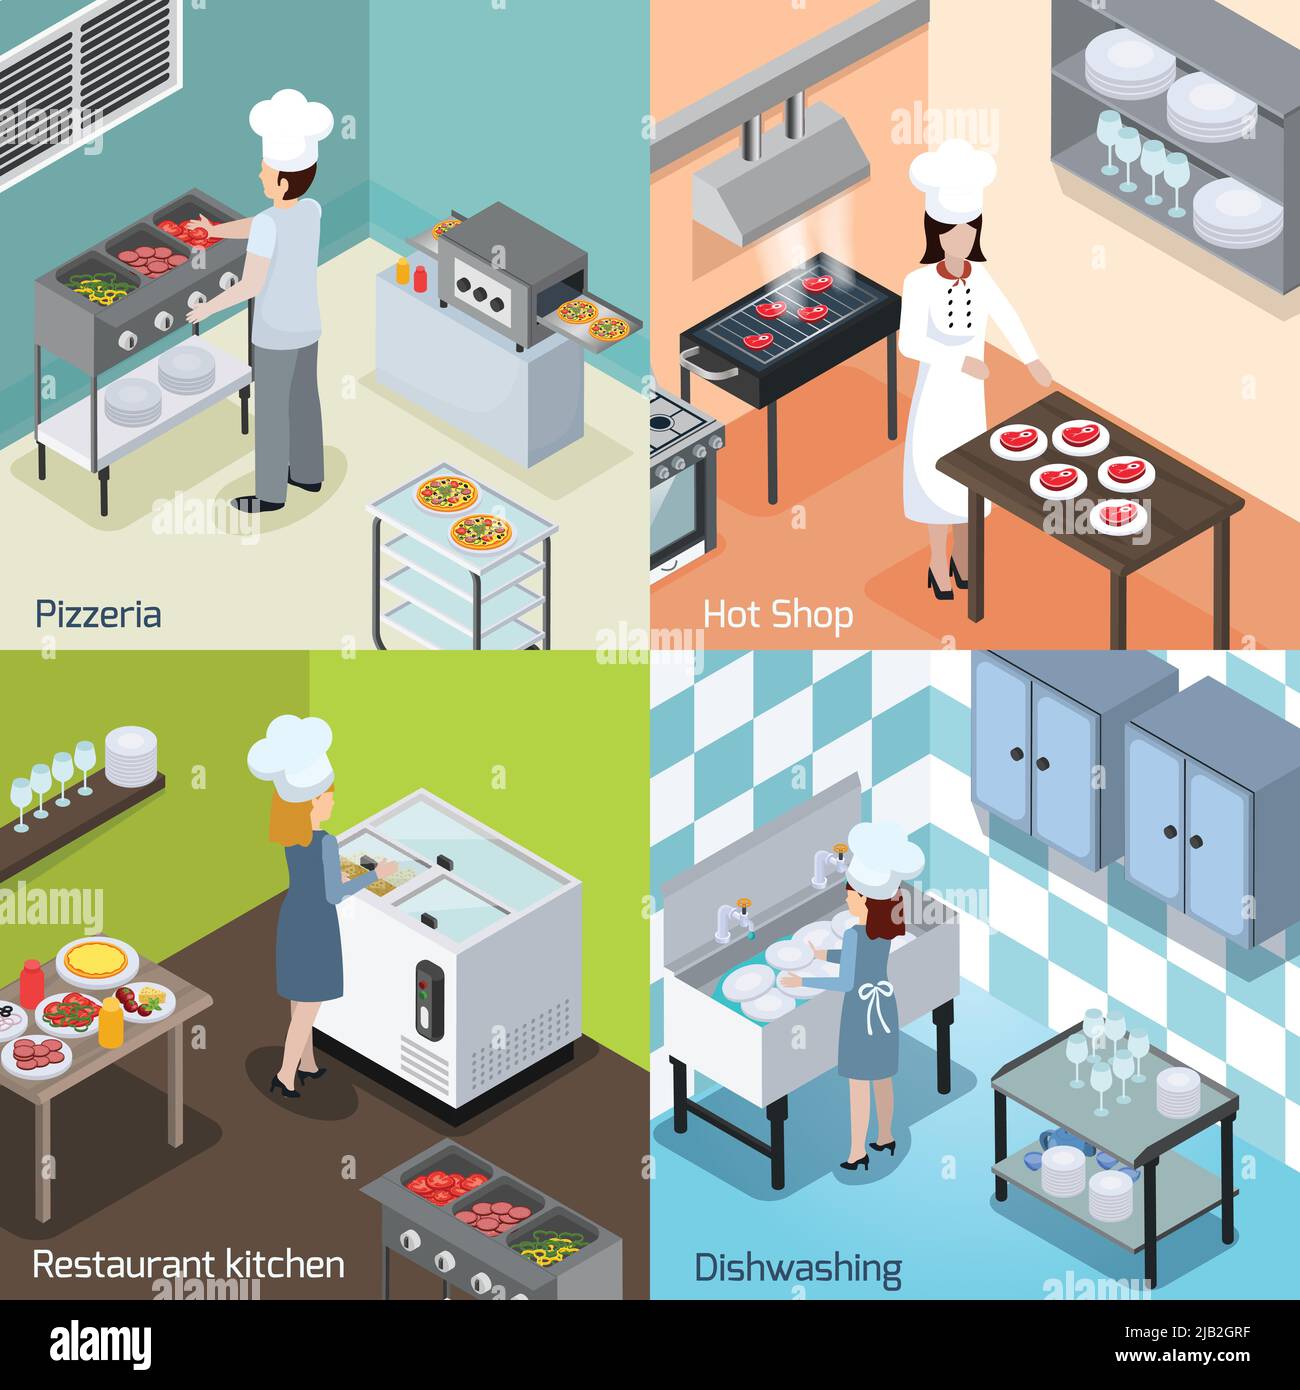 Commercial pizzeria and restaurant kitchen interior  equipment appliances 4 isometric icons square with dishwashing facility isolated vector illustrat Stock Vector